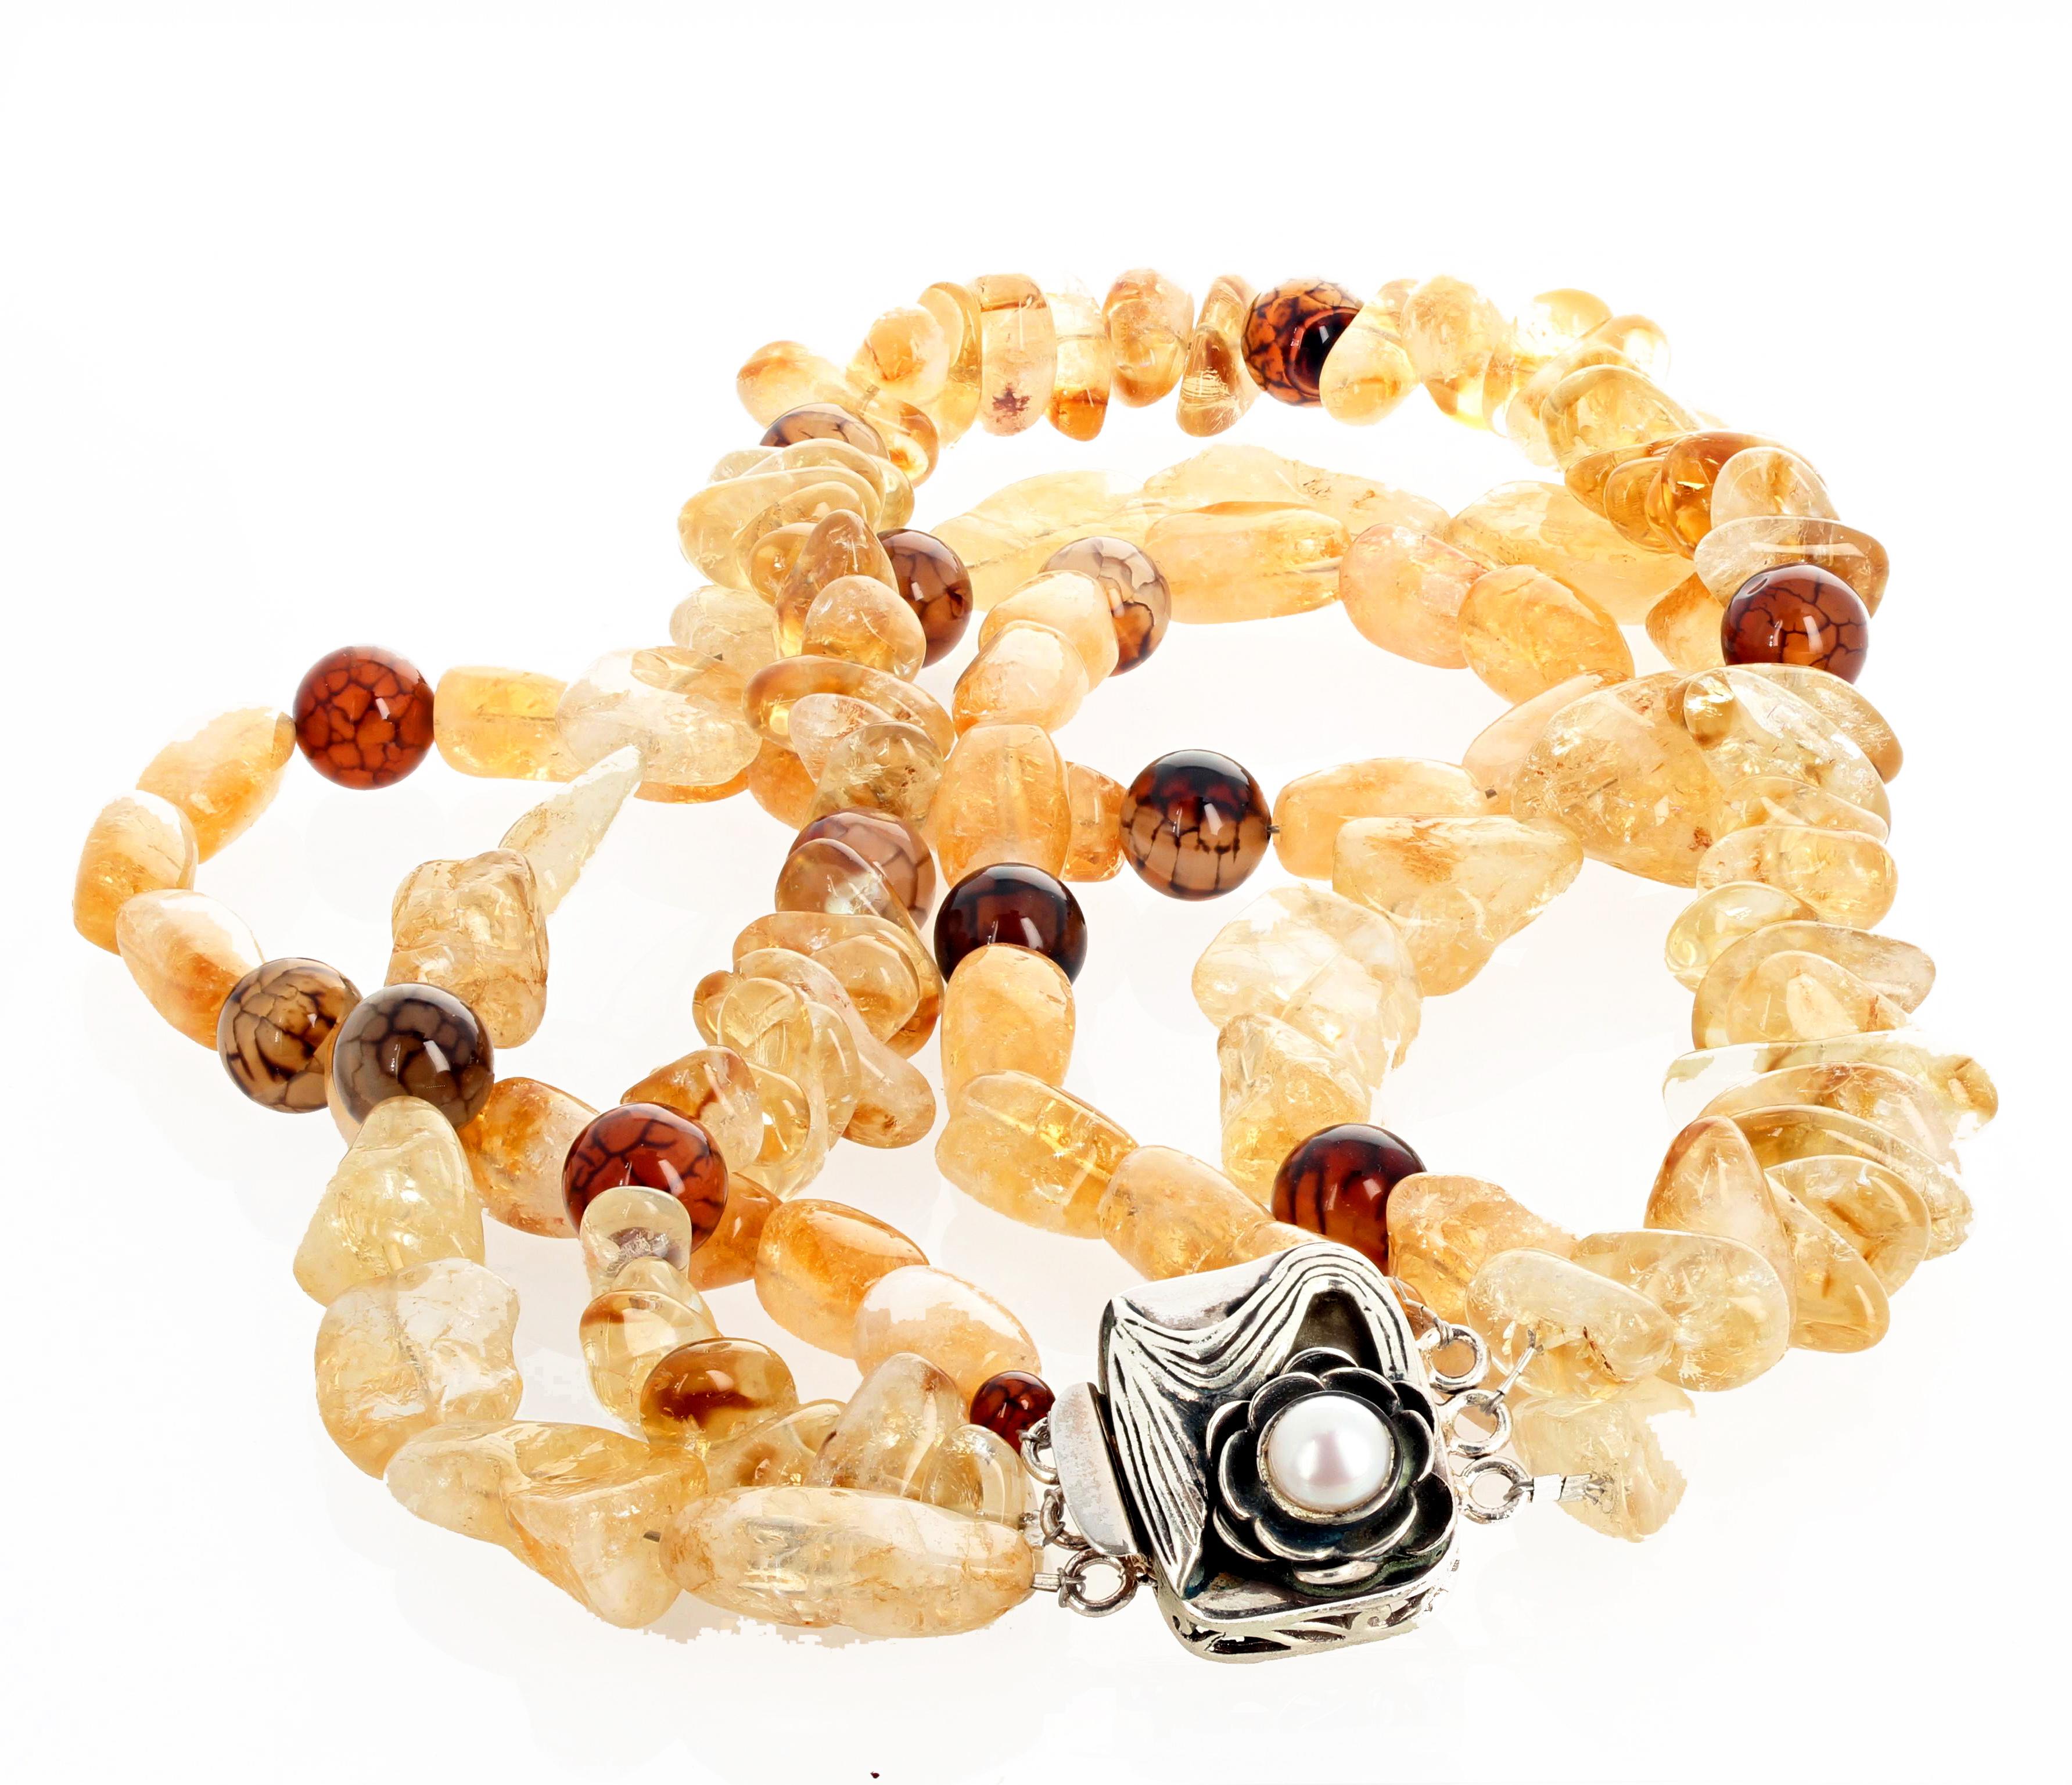 Custom made, glowing, elegant 18.5 inch triple strand necklace of highly polished natural Citrine rocks and round rare natural Spider Web Jasper. This versatile necklace can be worn with each strand freely hanging to best appreciate the Citrines and